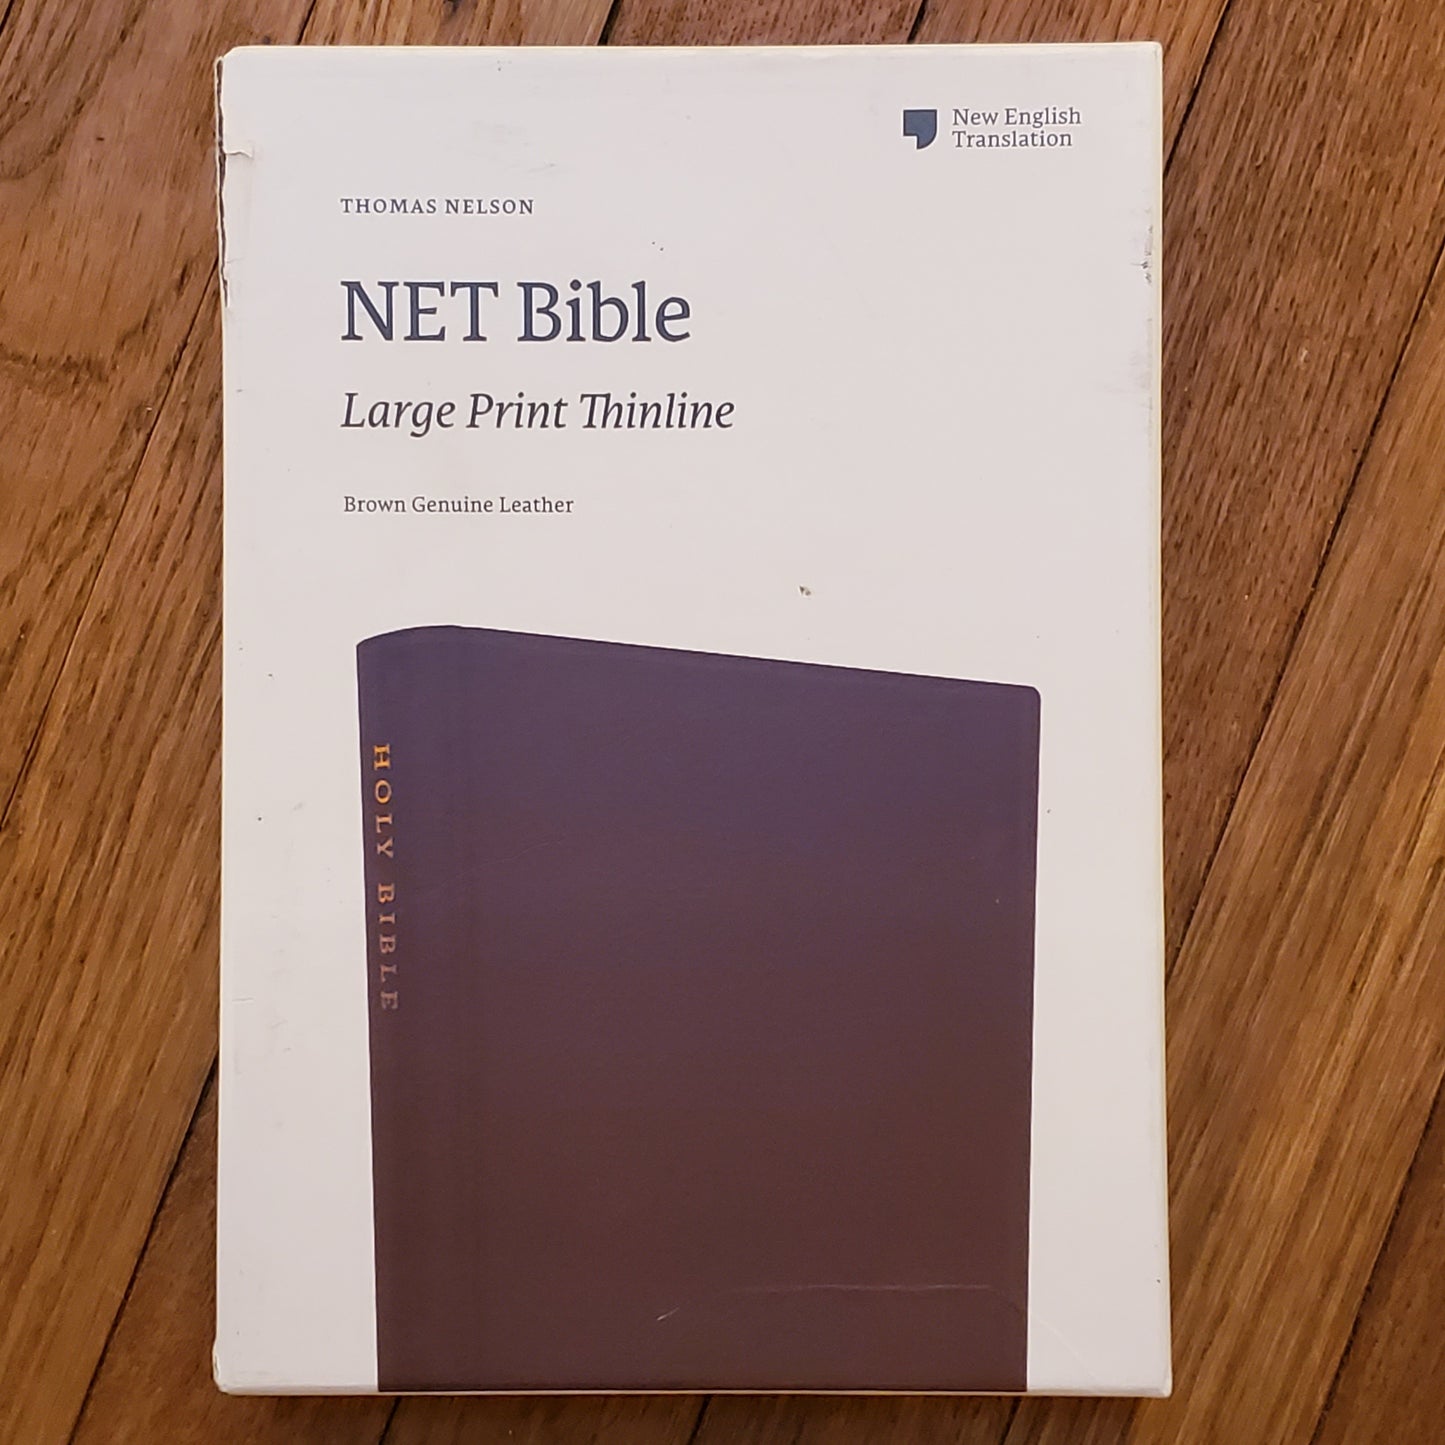 GB NET Bible Large Print Thinline Genuine Leather, Brown